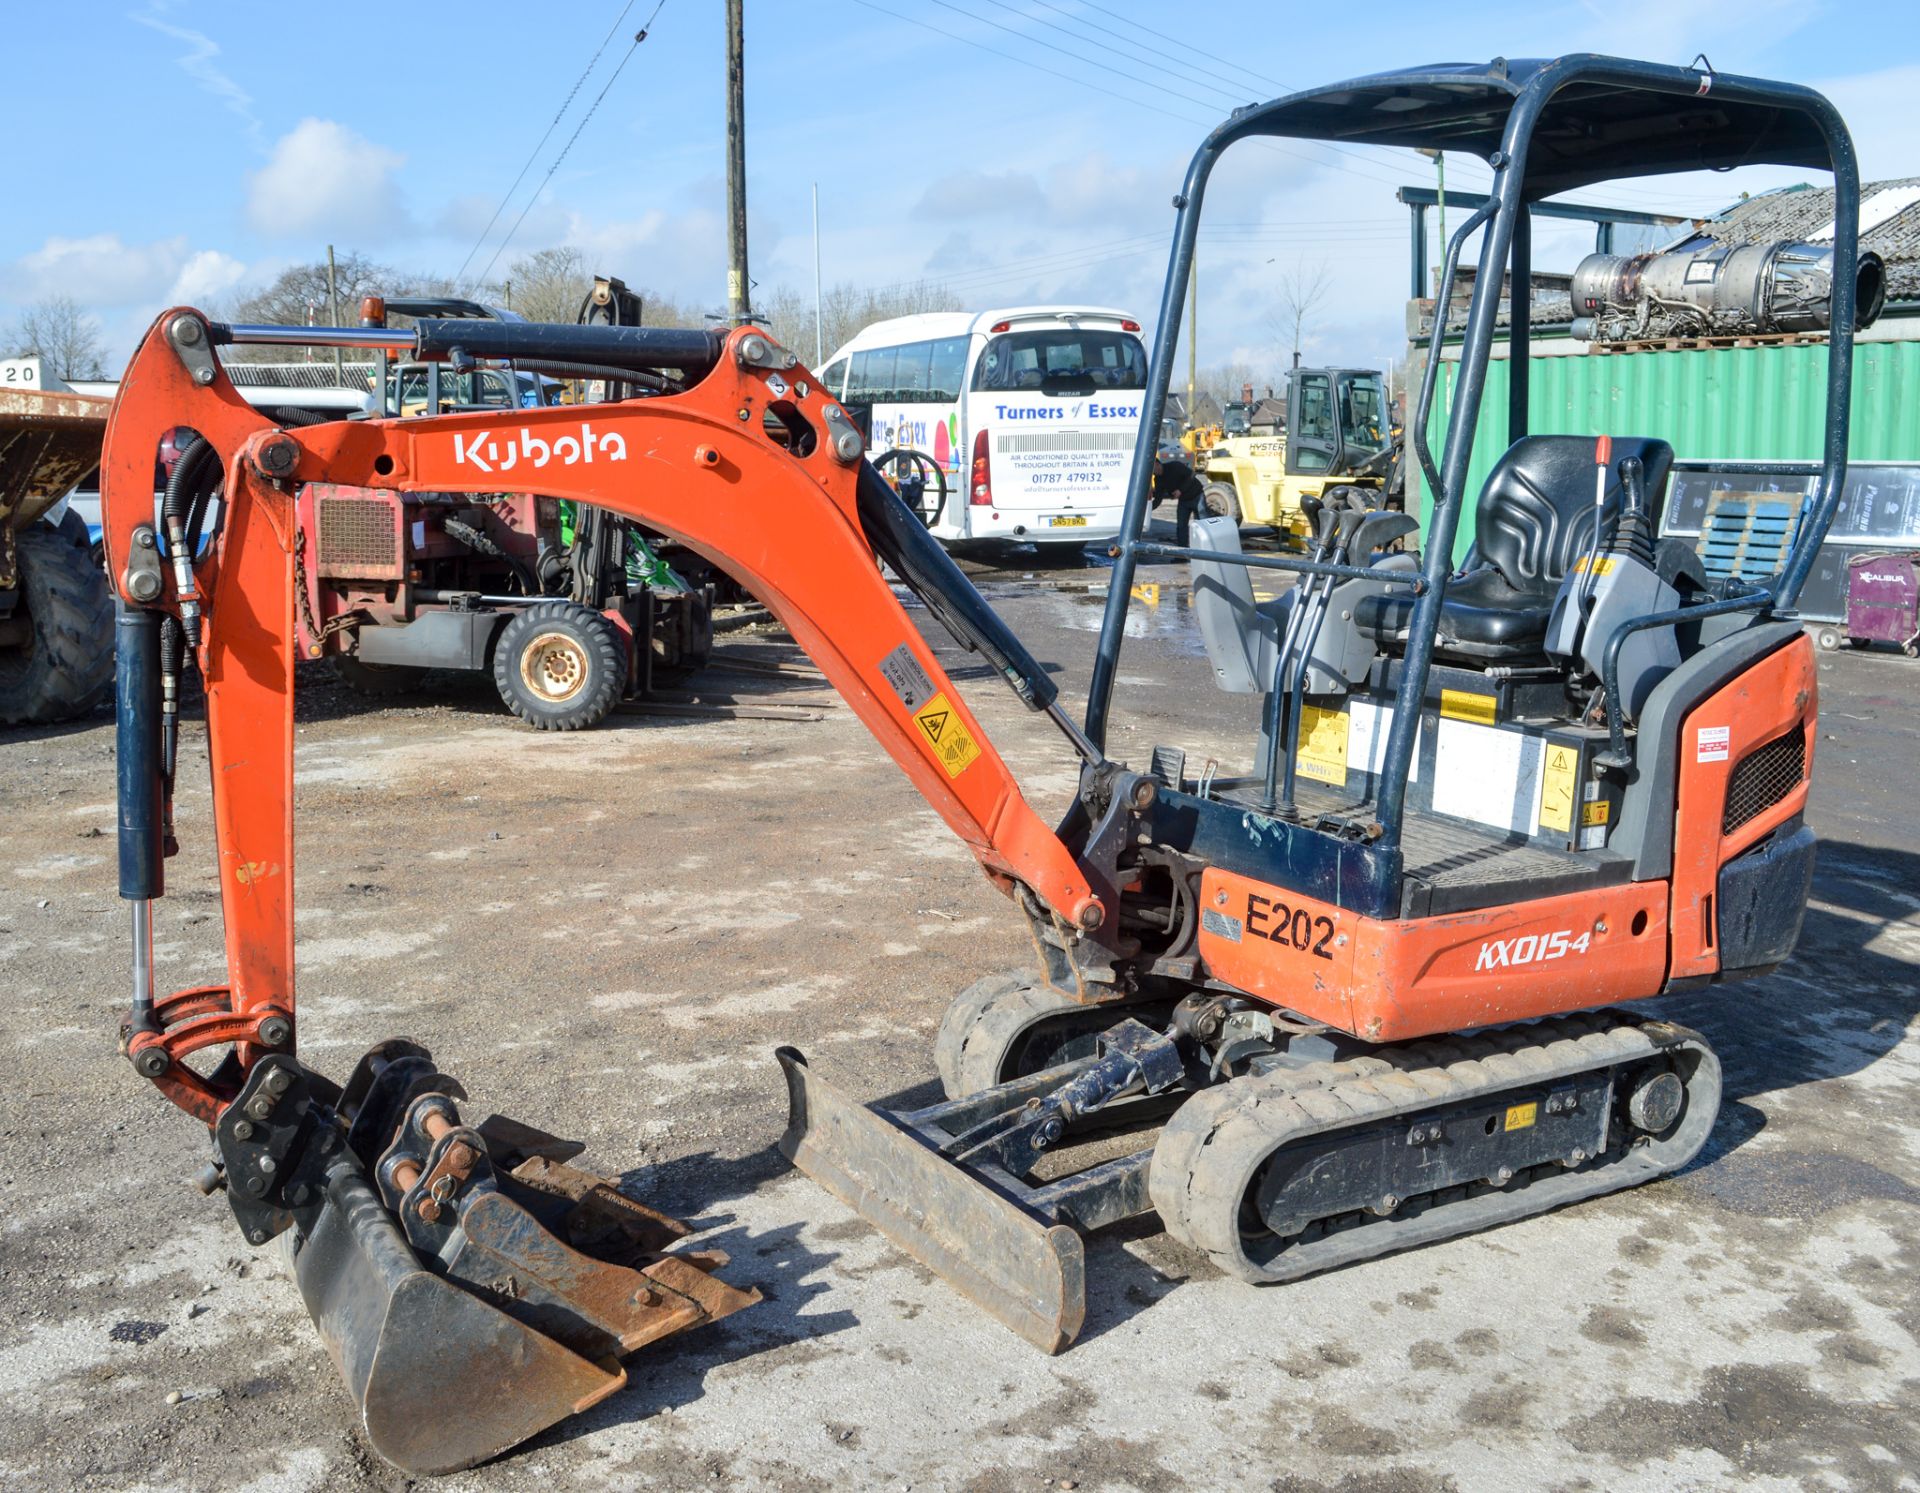 Kubota KX015.4 1.5 tonne rubber tracked excavator Year: 2015 S/N: 58748 Recorded Hours: 1056